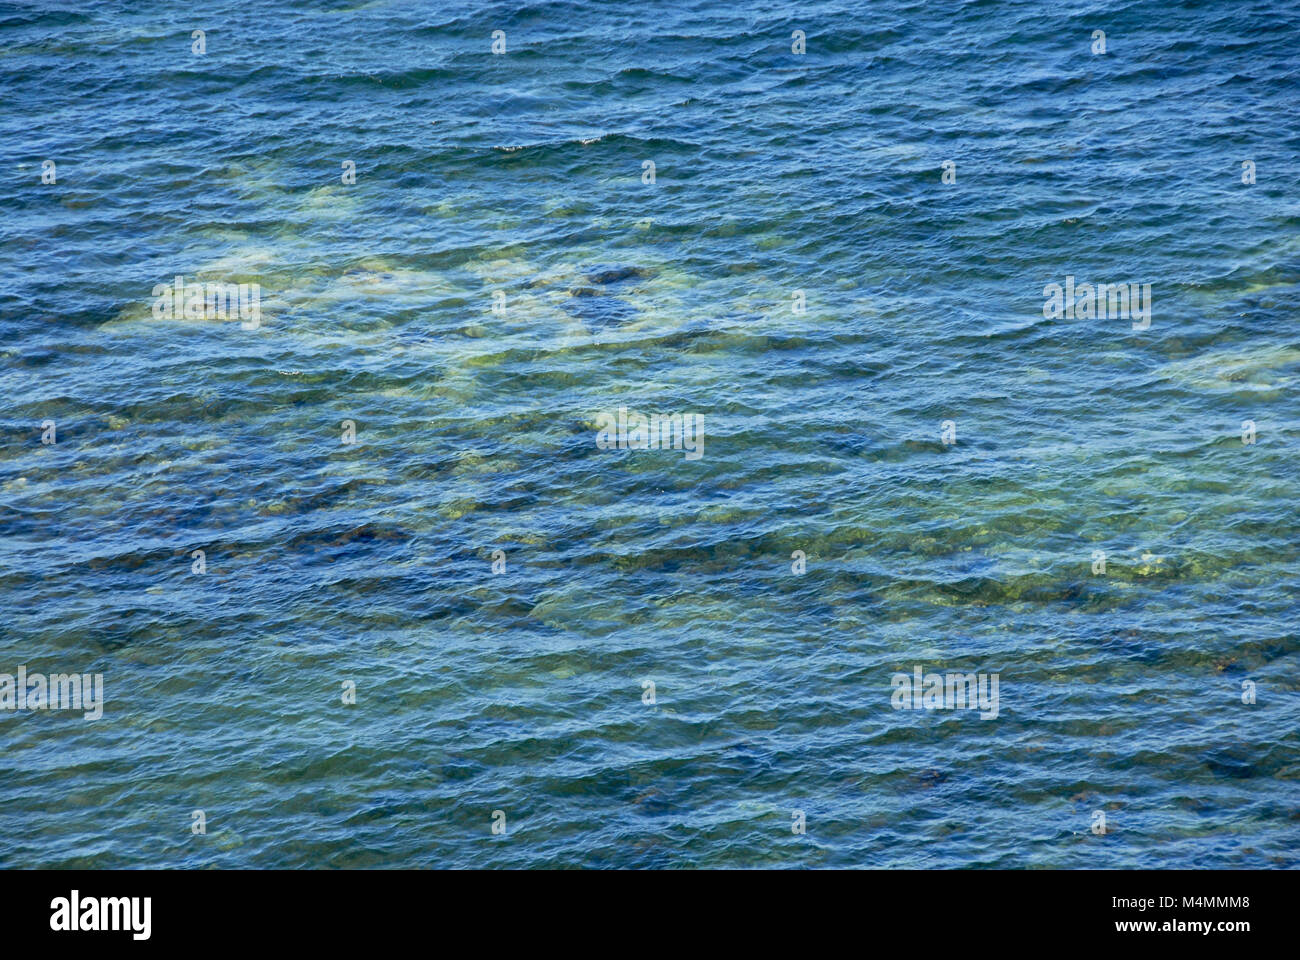 Abstract image of sea water Stock Photo